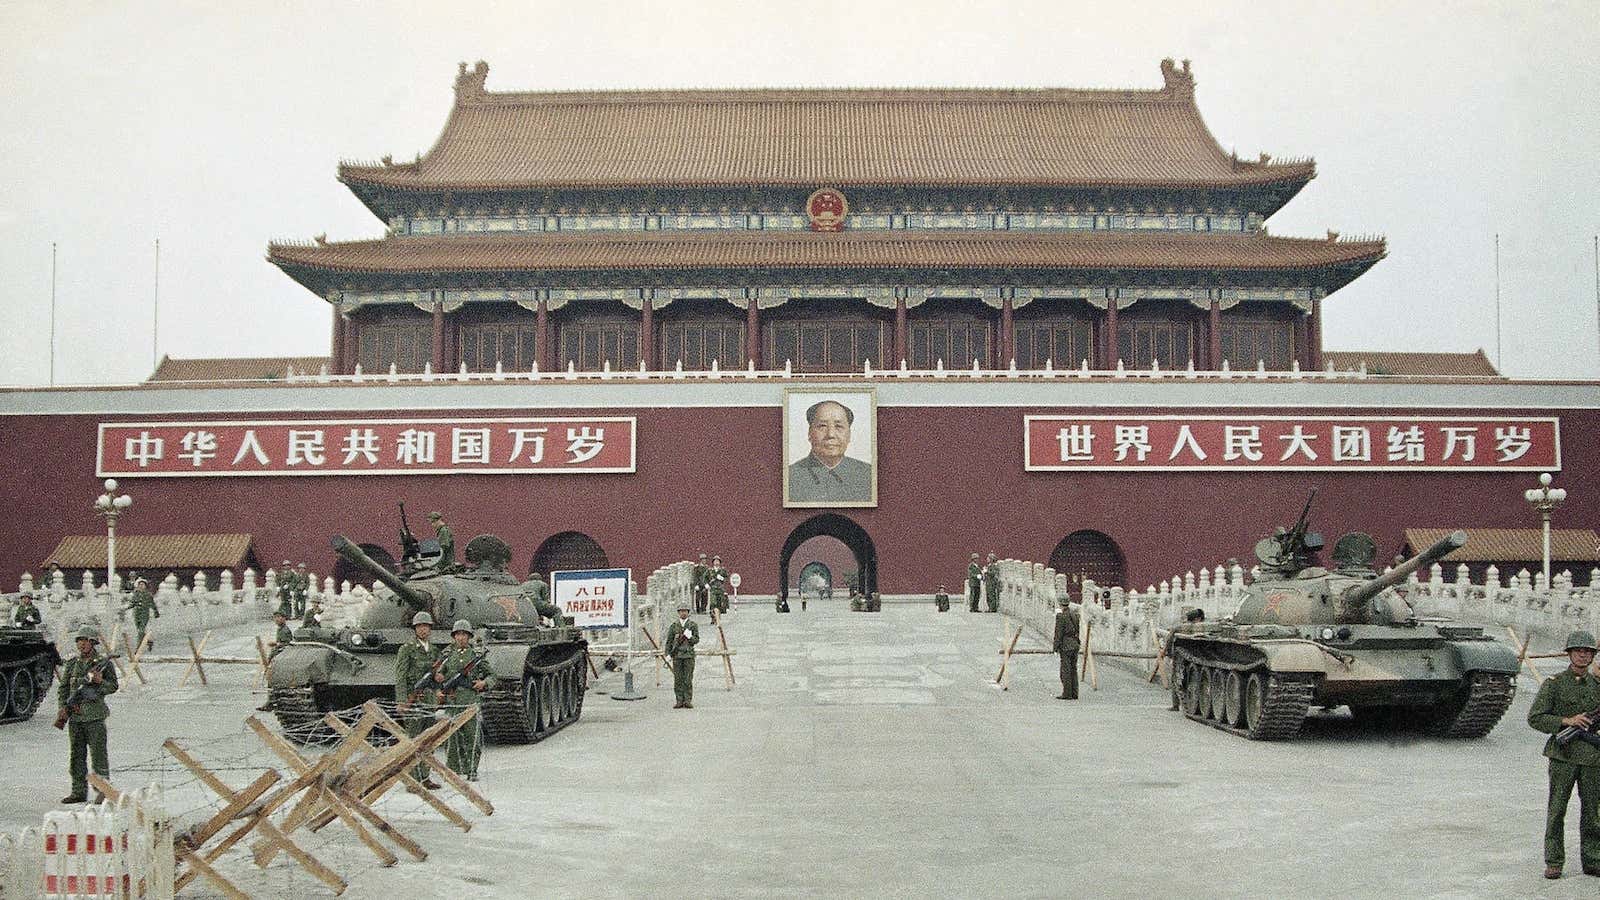 Peoples Liberation Army (PLA) troops standing guard with tanks in front of Tiananmen Gate. June, 1989.